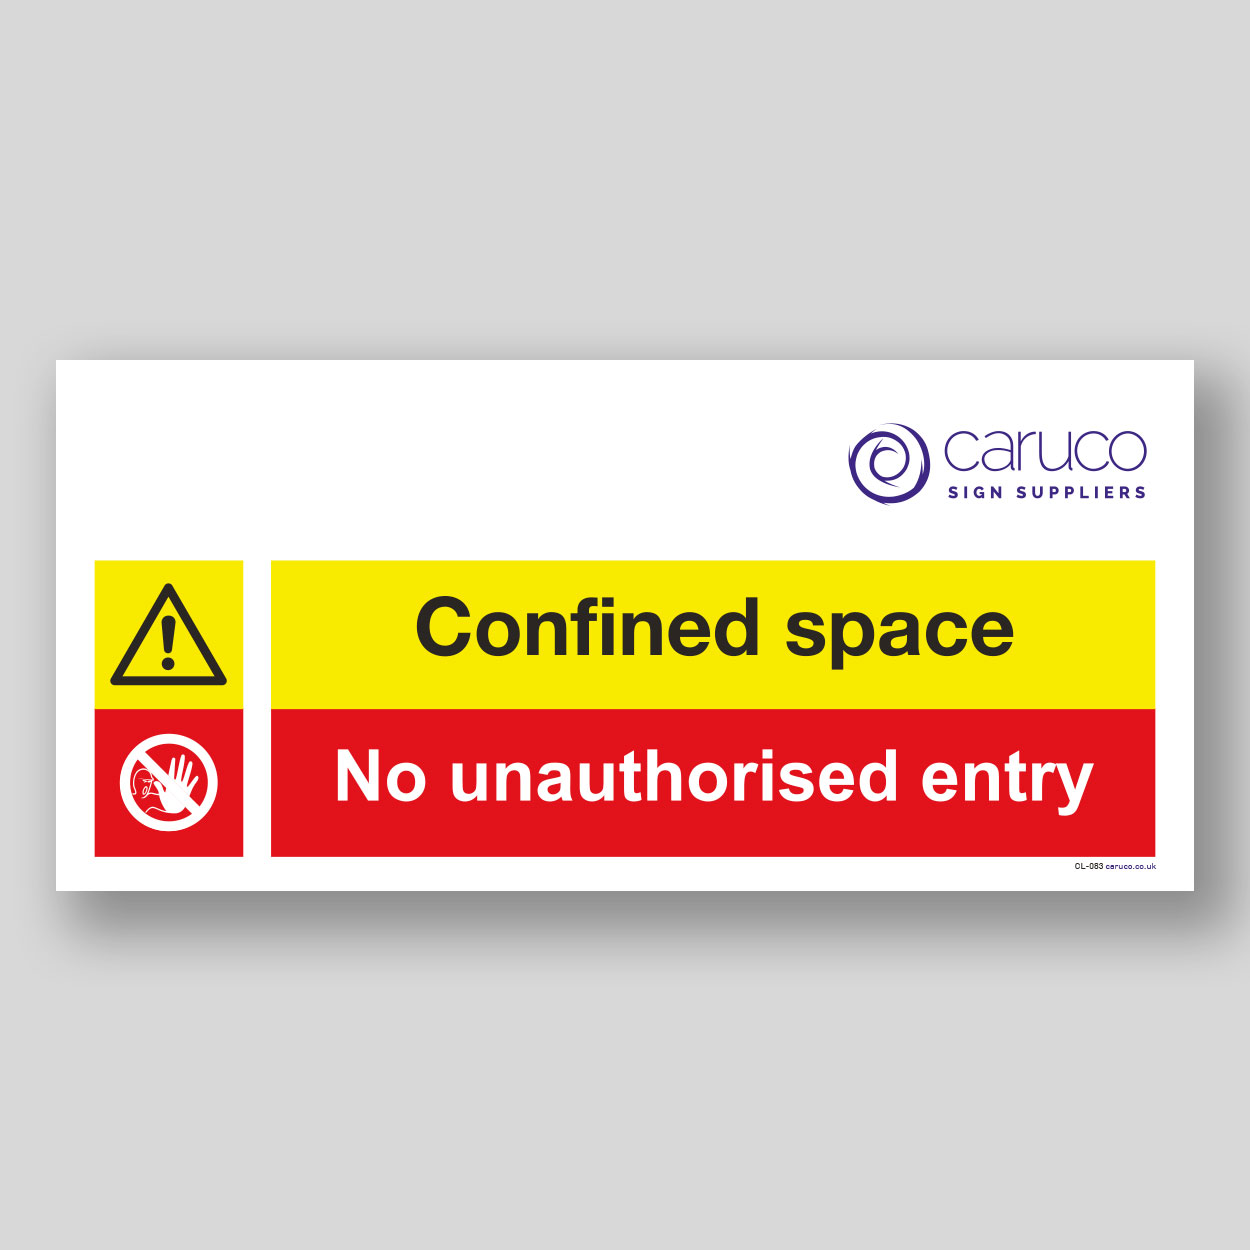 CL-083 Confined space - no unauthorised entry